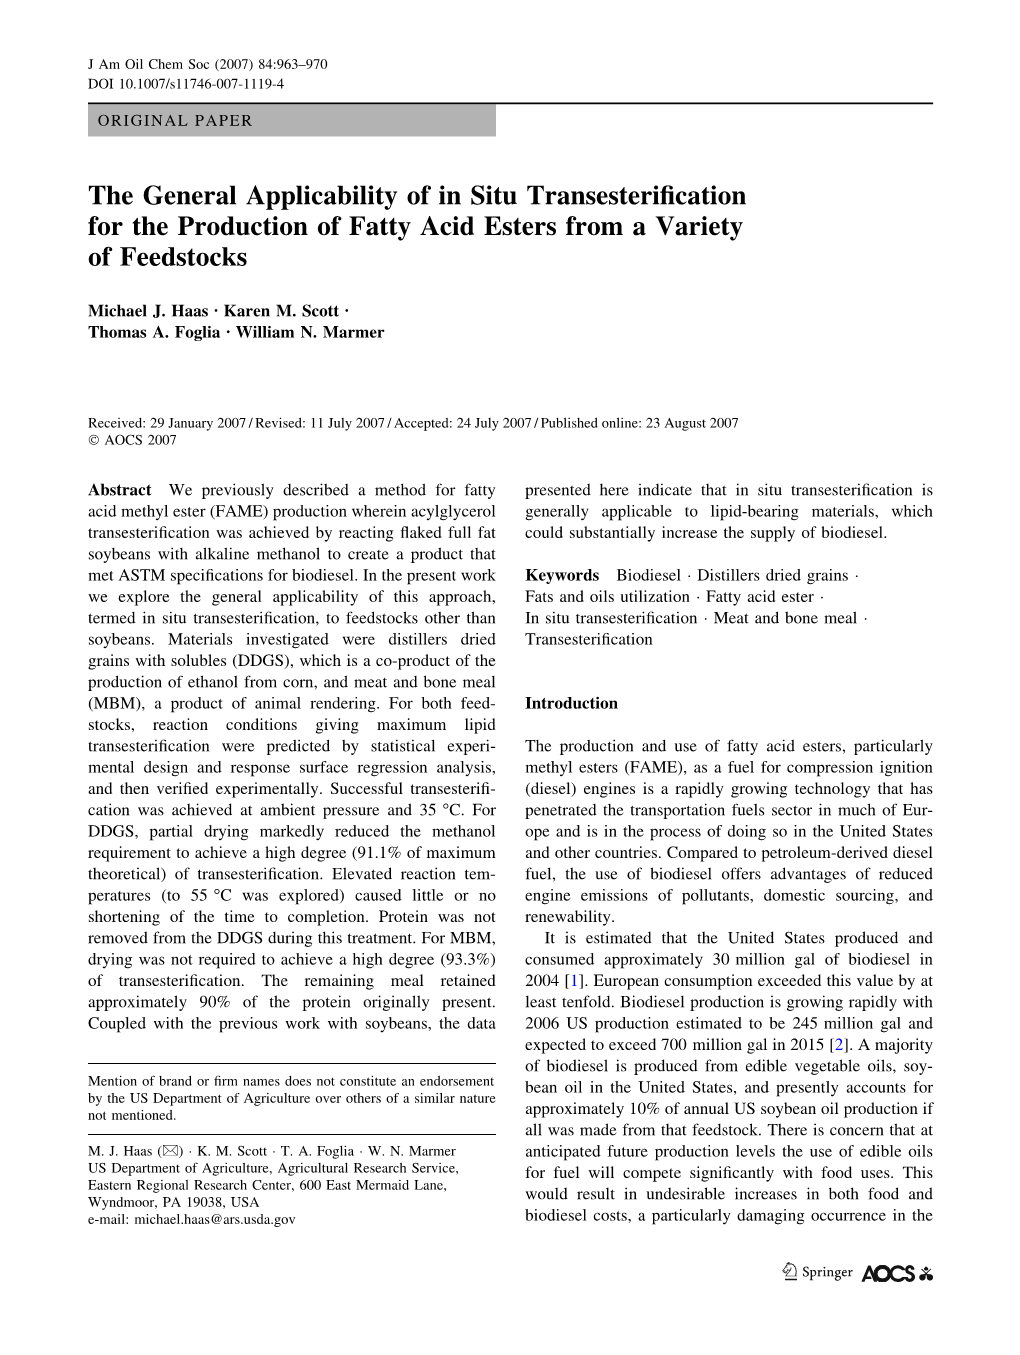 The General Applicability of in Situ Transesterification for The